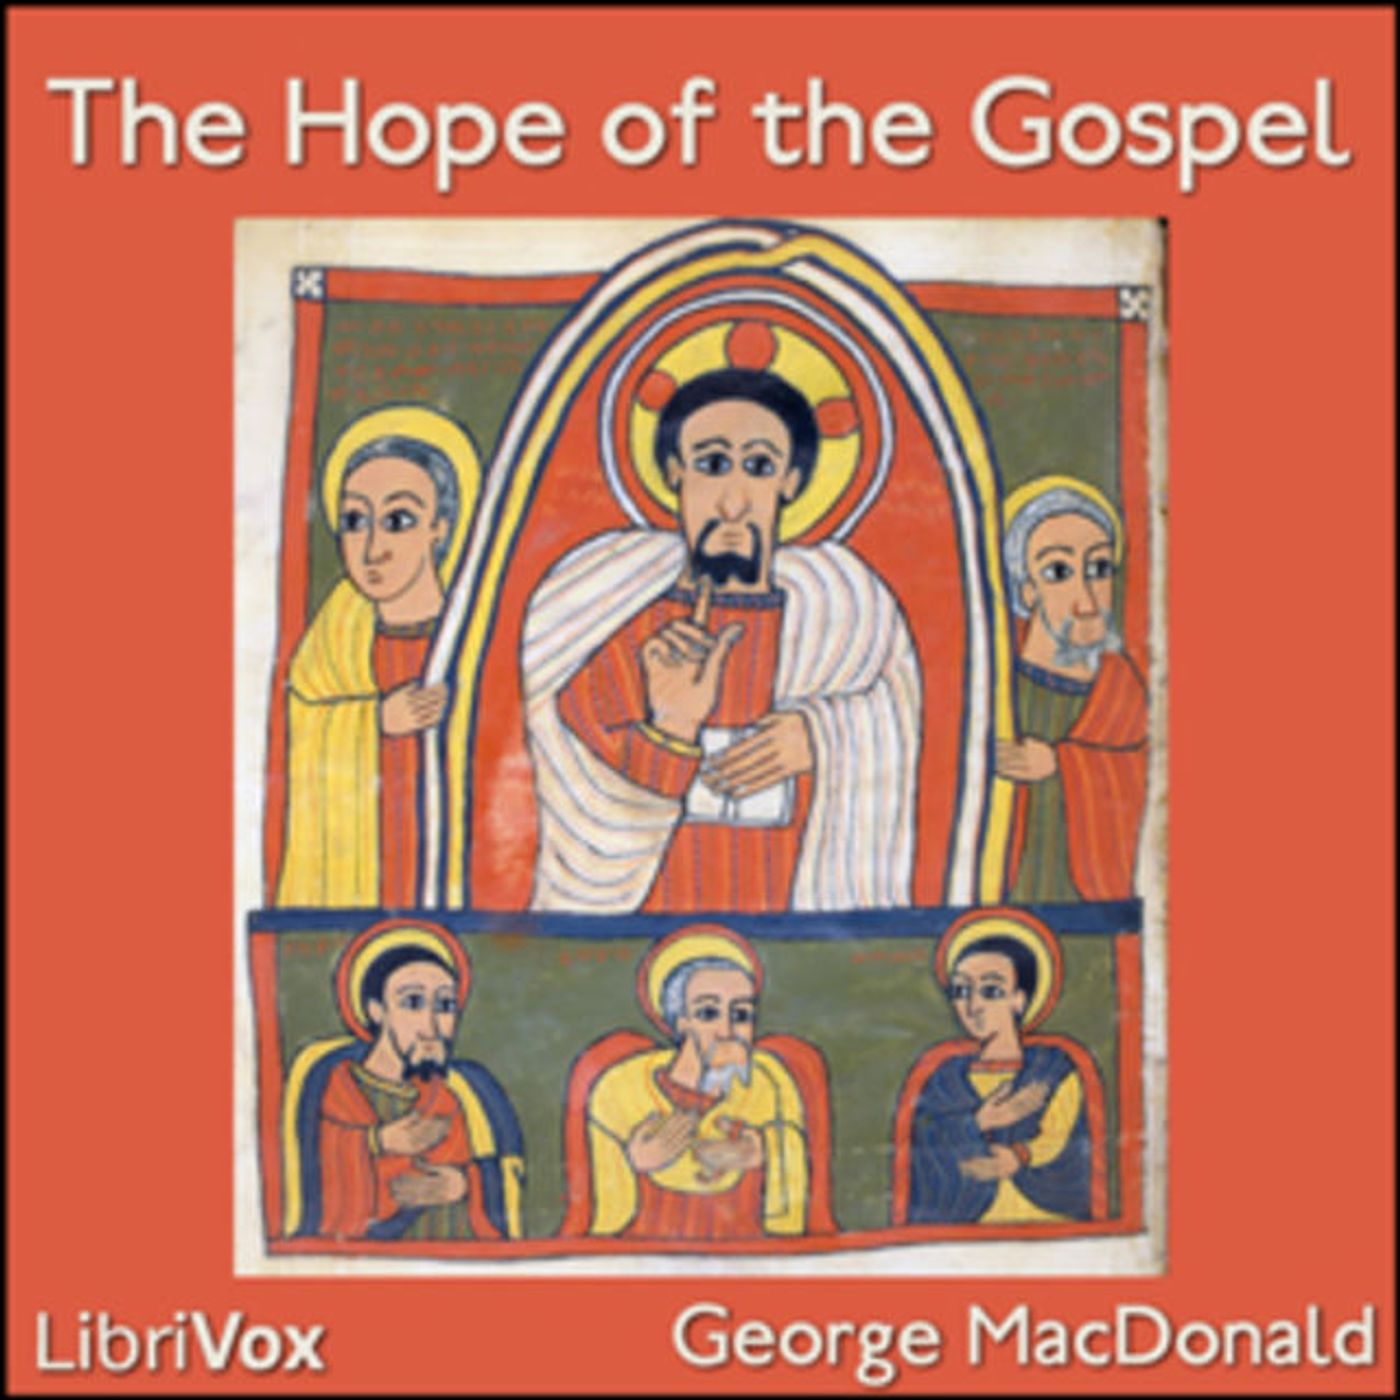 The Hope of the Gospel by George MacDonald 3 Free Audiobooks Tale Teller Library